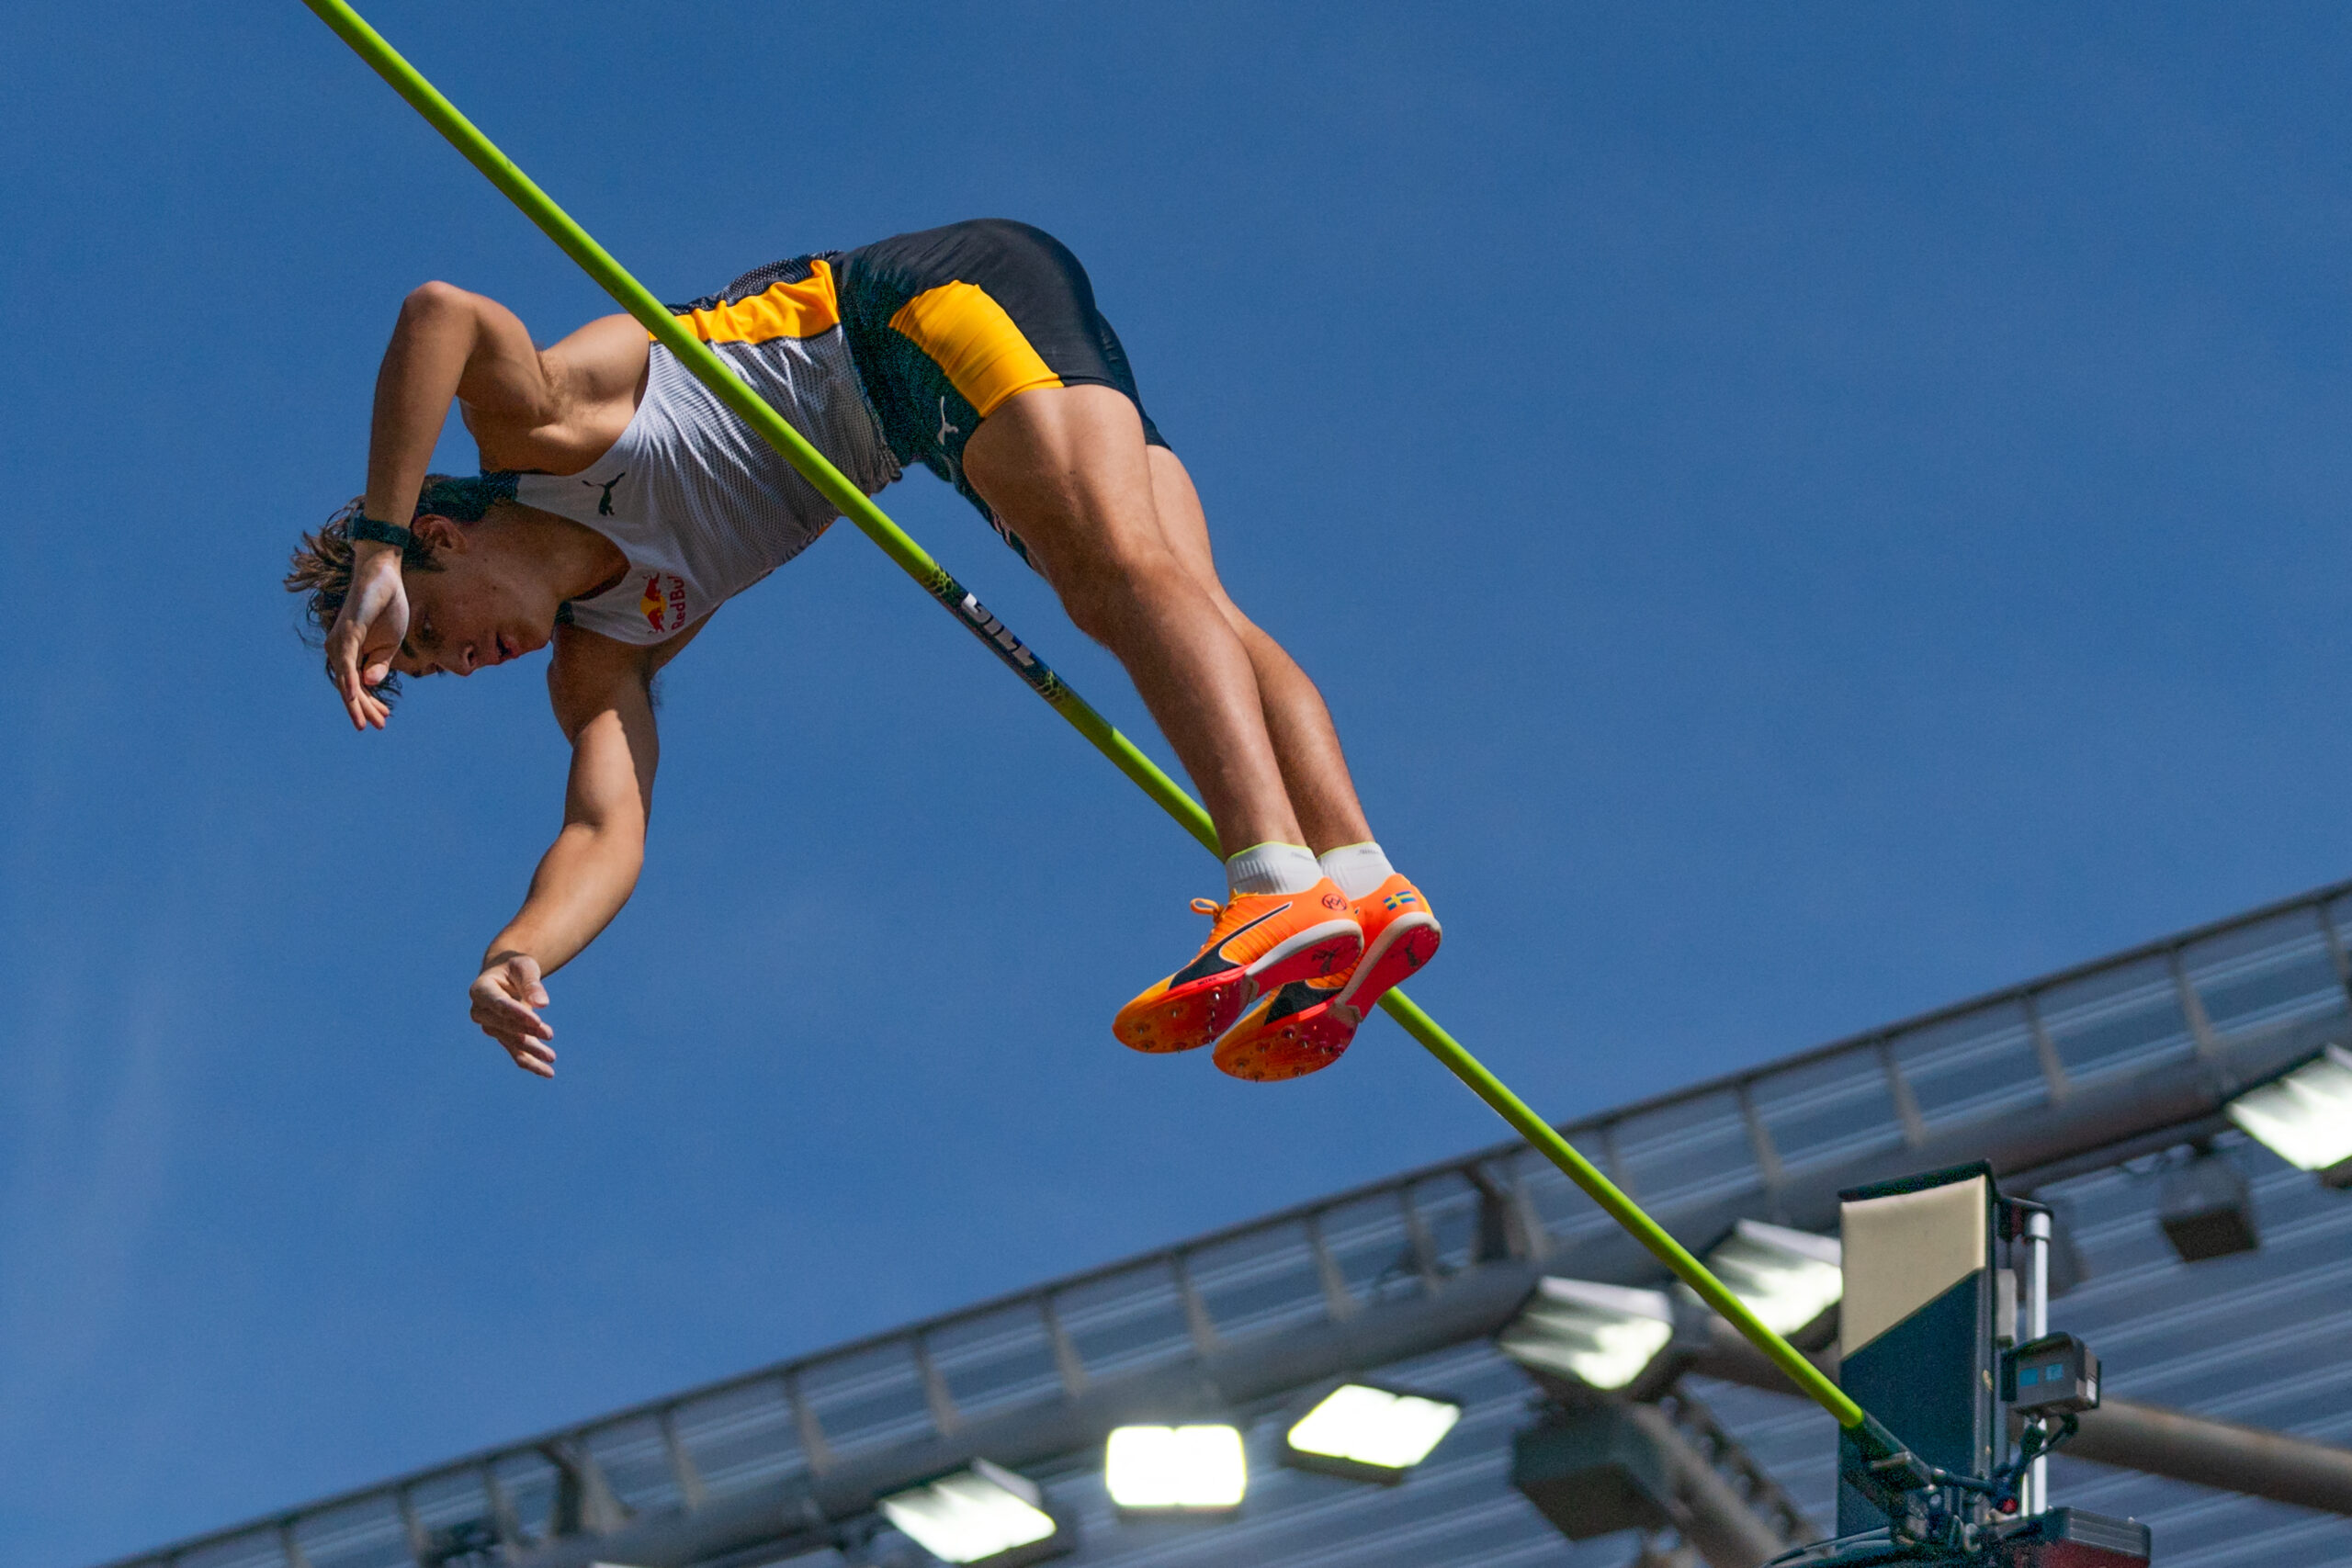     Armand Duplantis of Sweden competes in the men's pole vault during the 2023 Prefontaine Classic and Wanda Diamond League Finals at Hayward Field on September 17, 2023 in Eugene, Oregon. 